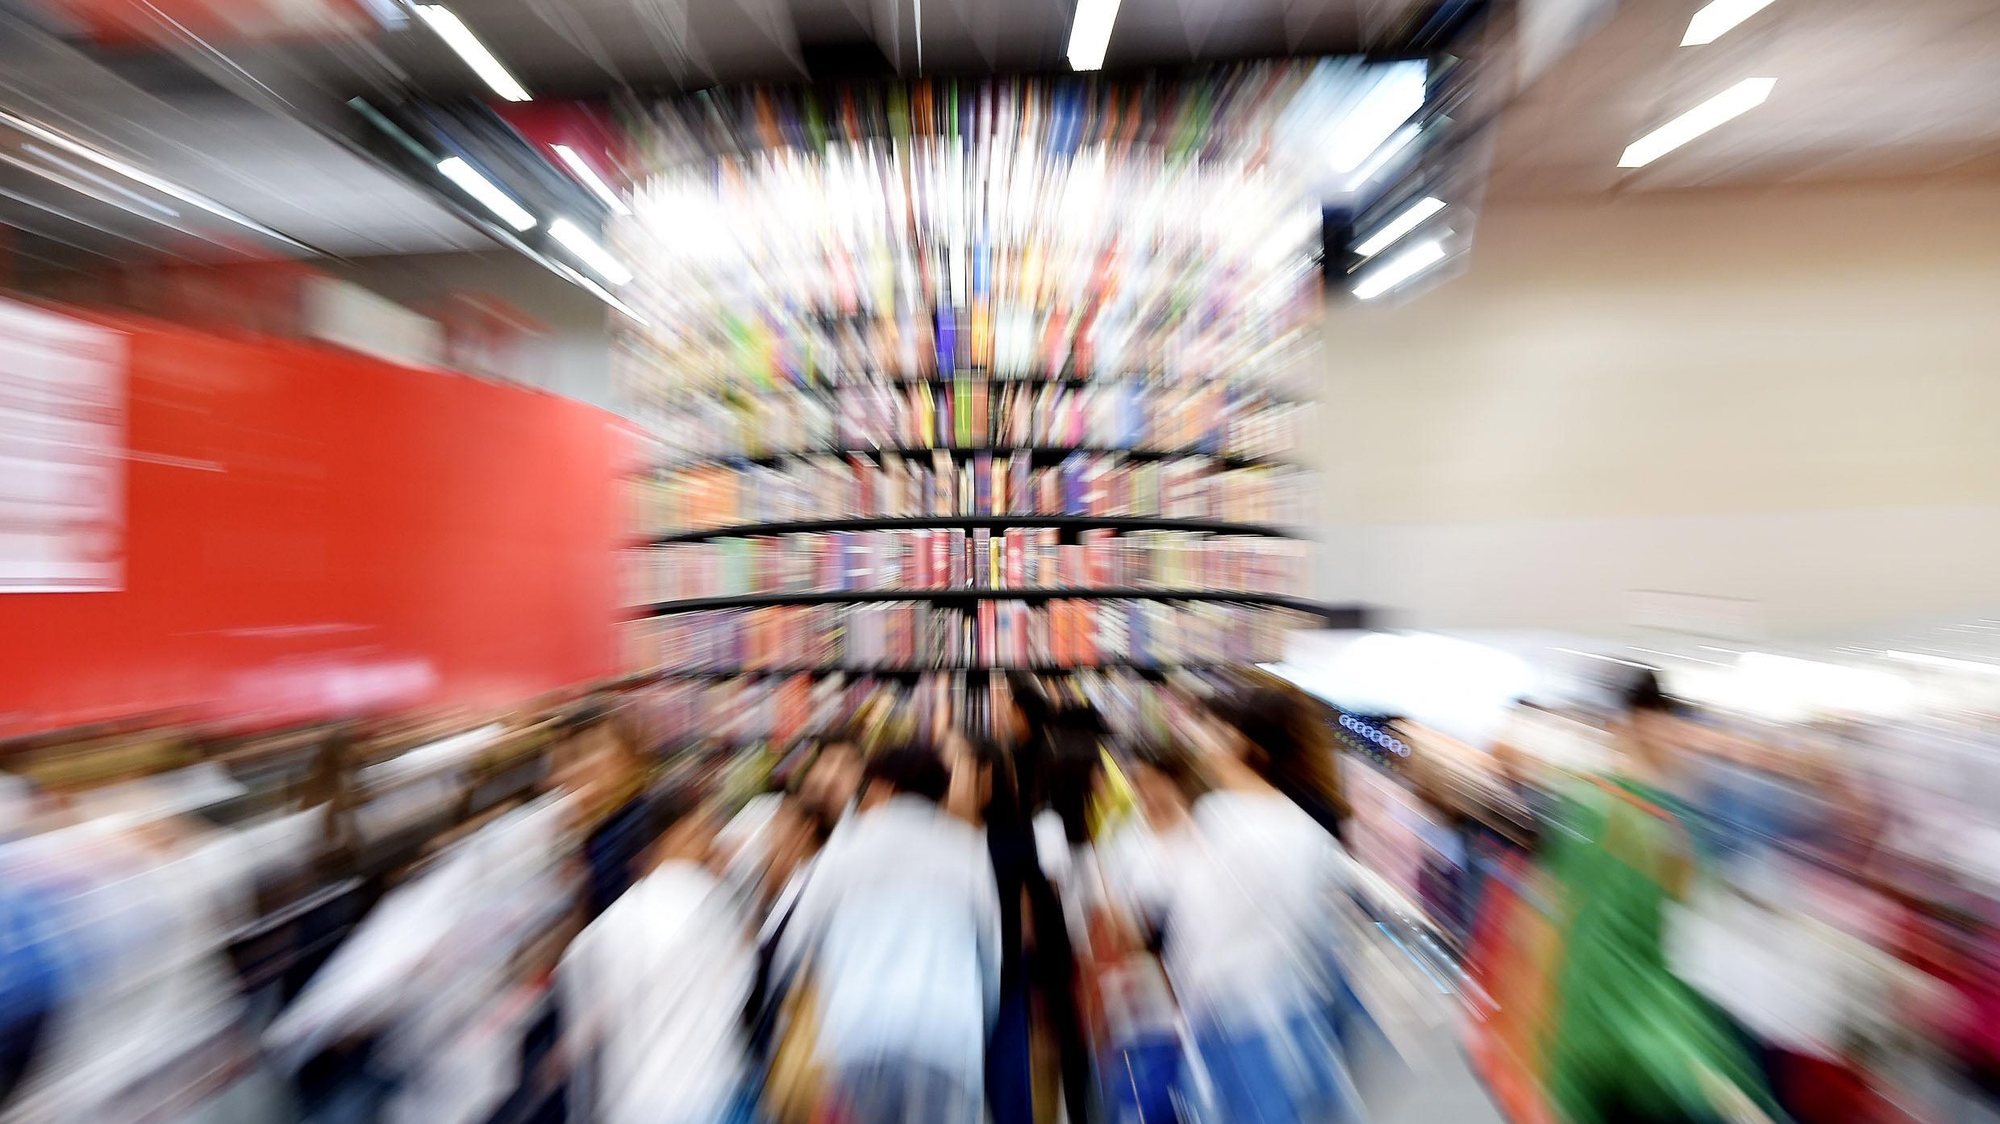 epa06728453 Visitors attend the 31st Turin International Book Fair in Turin, Italy, 11 May 2018. The Turin International Book Fair running from 10 to 14 May is the largest book fair in Italy.  EPA/ALESSANDRO DI MARCO